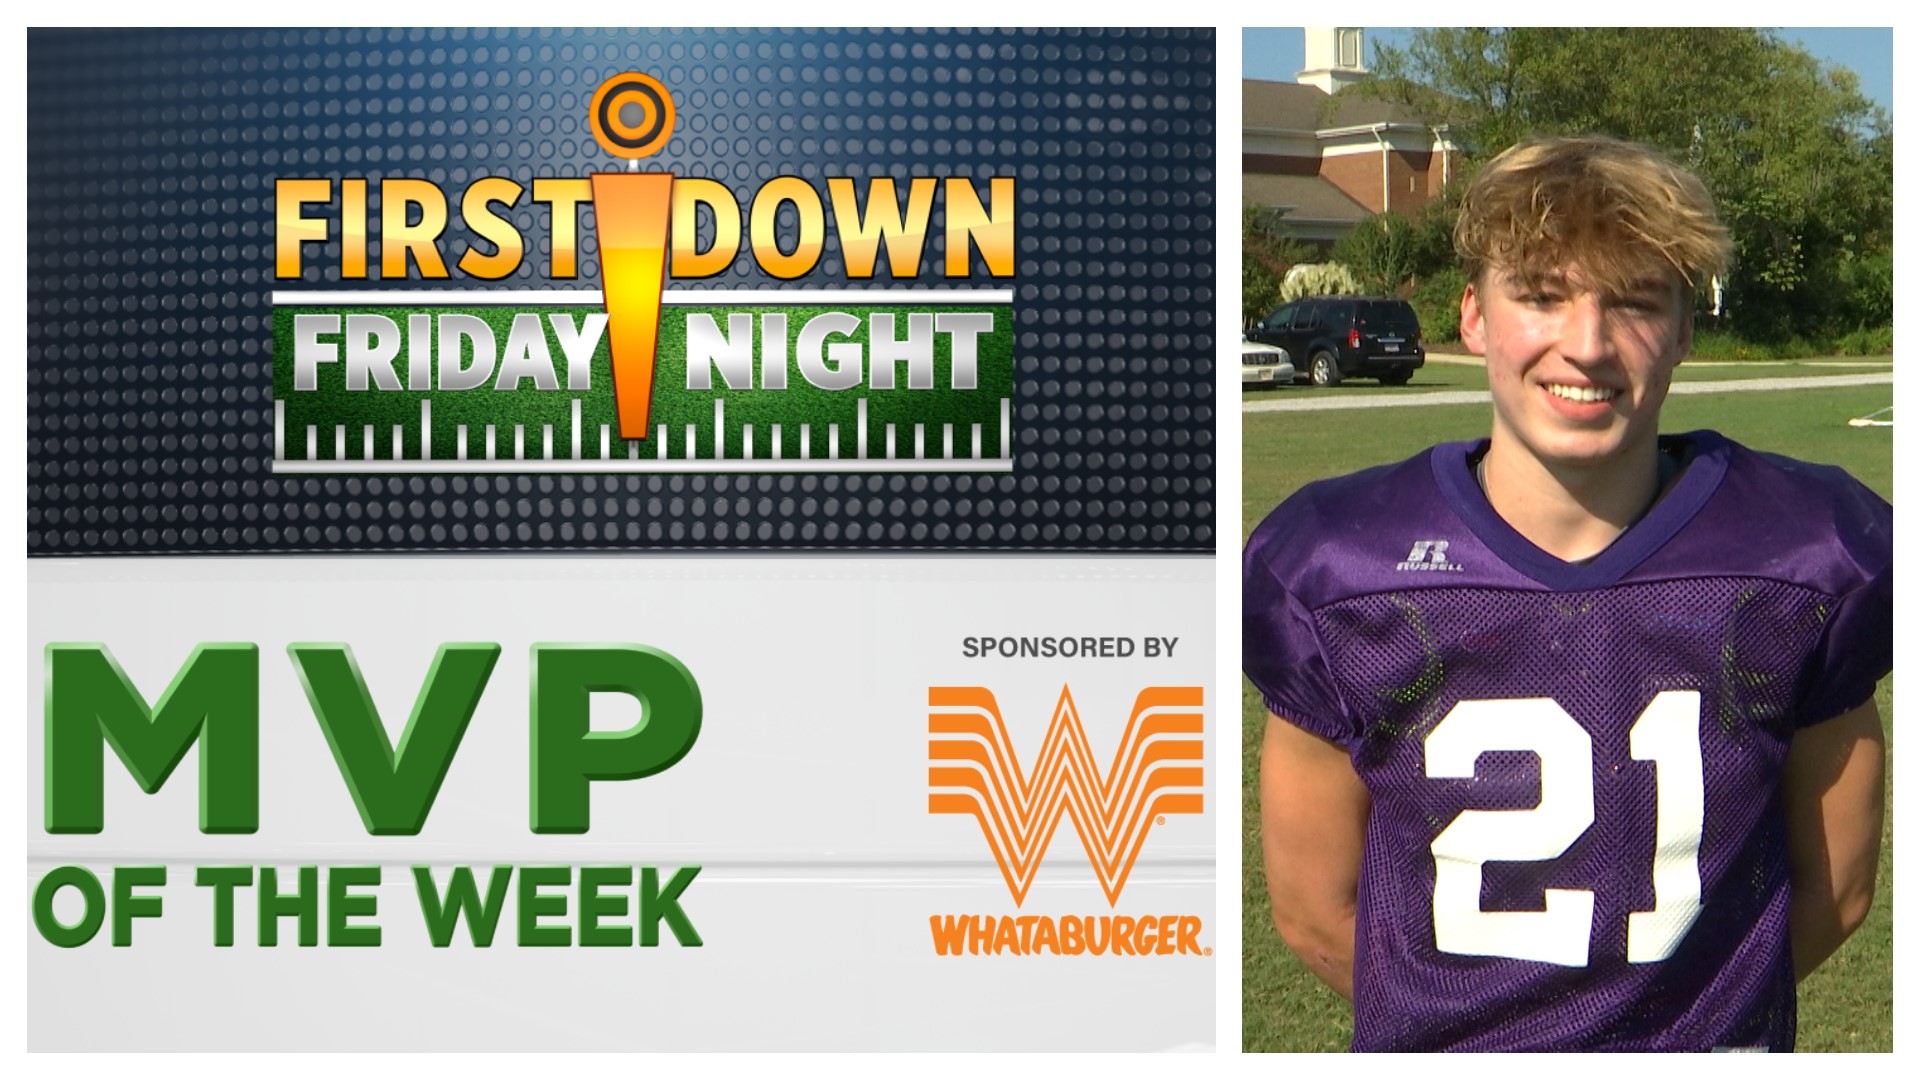 Whitesburg Christian's Ryan Turner rushed for 342 yards and scored four touchdowns in the Warriors 51-28 victory. Turner has been named the FDFN MVP of the Week